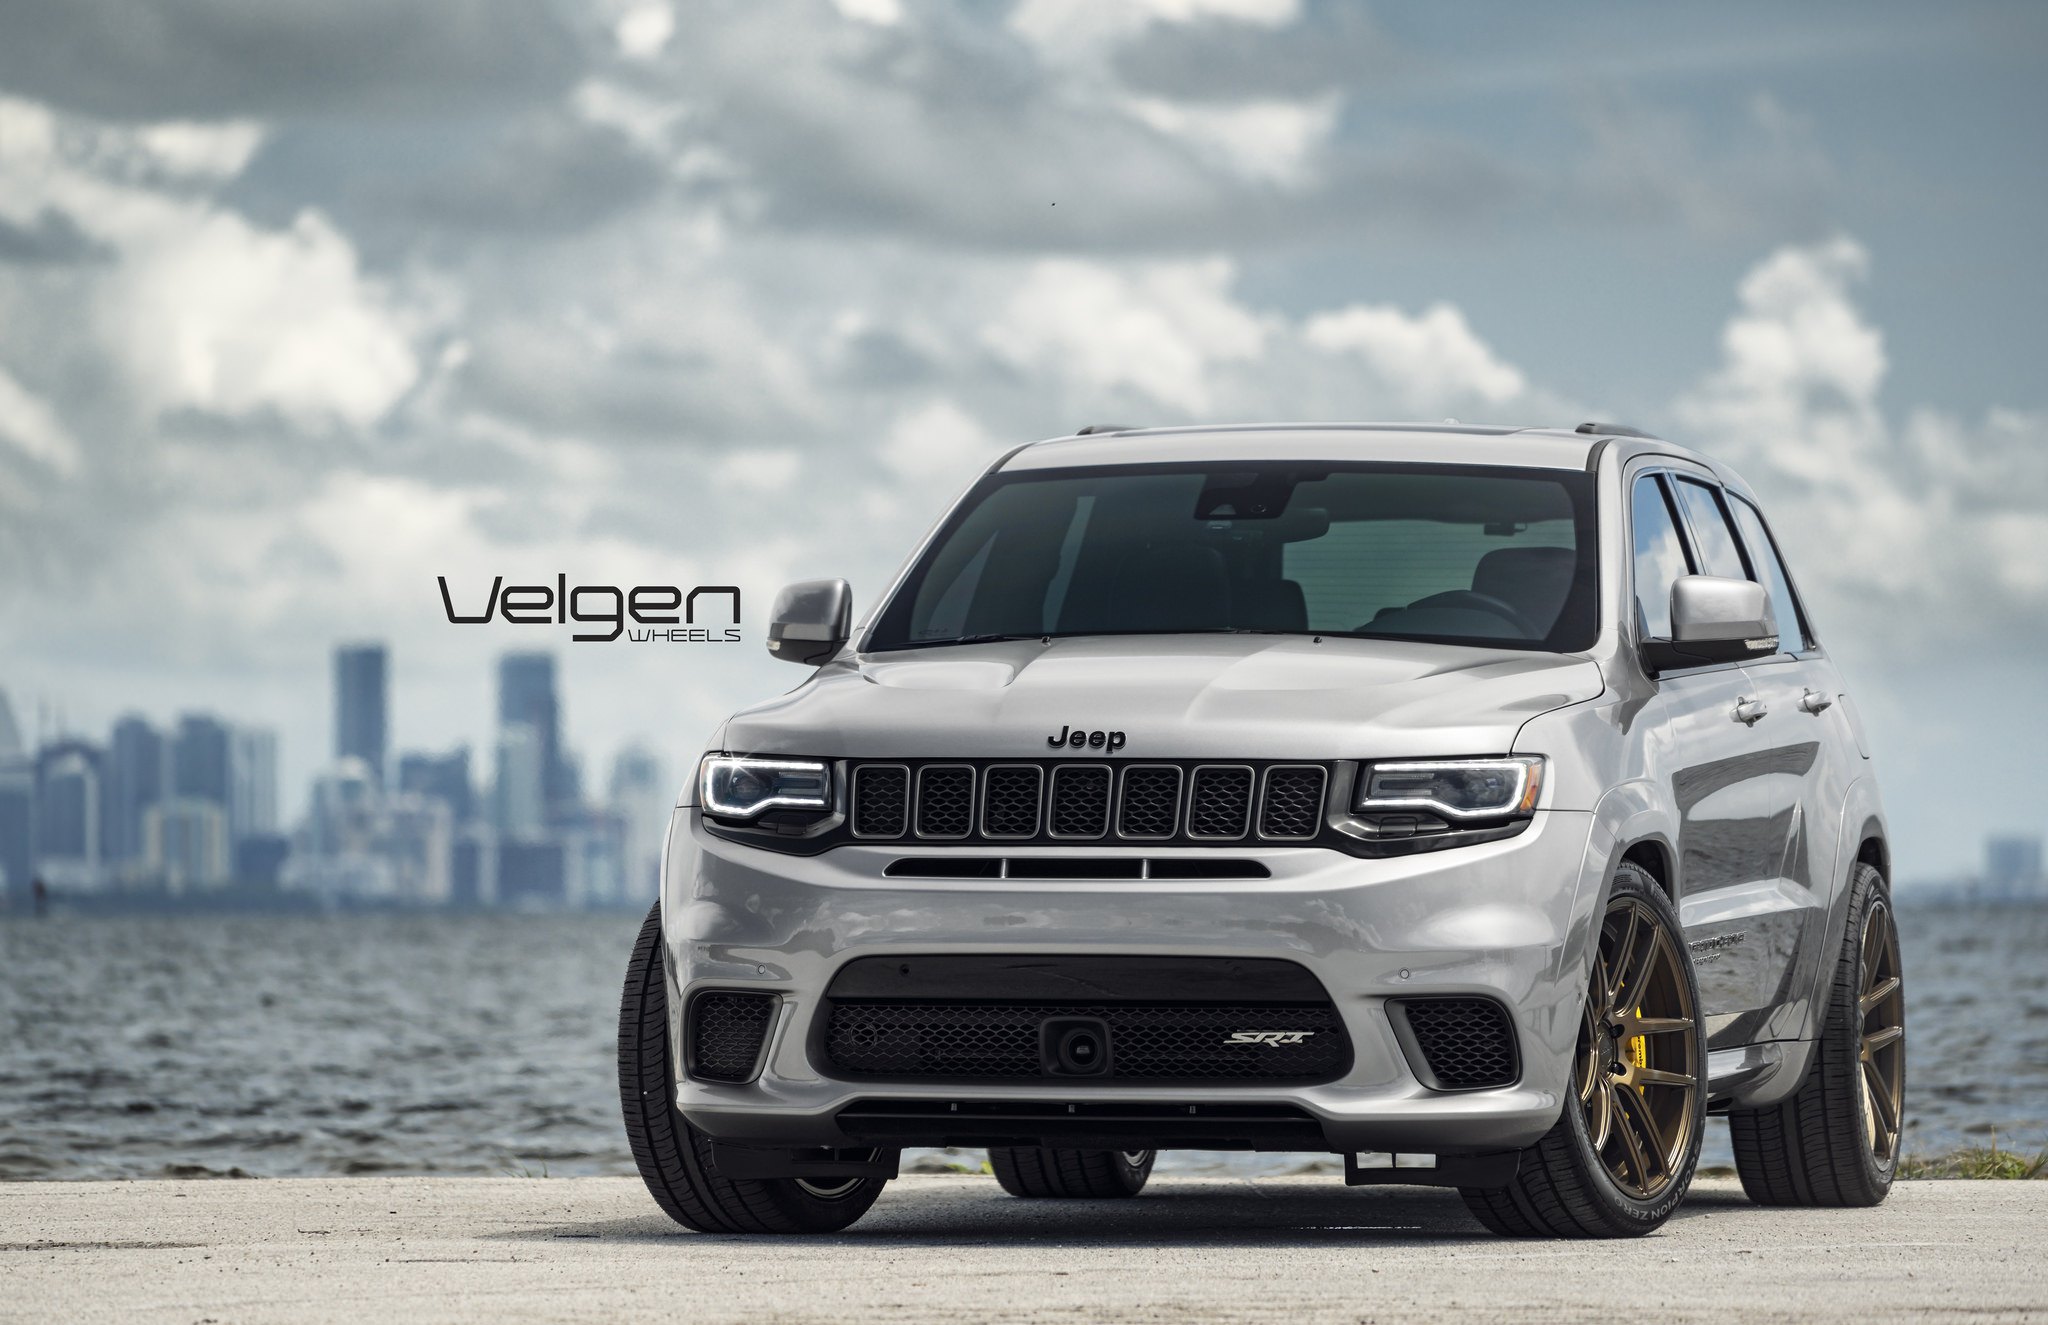 Blacked Out Mesh Grille on Gray Jeep Grand Cherokee - Photo by Velgen Wheels